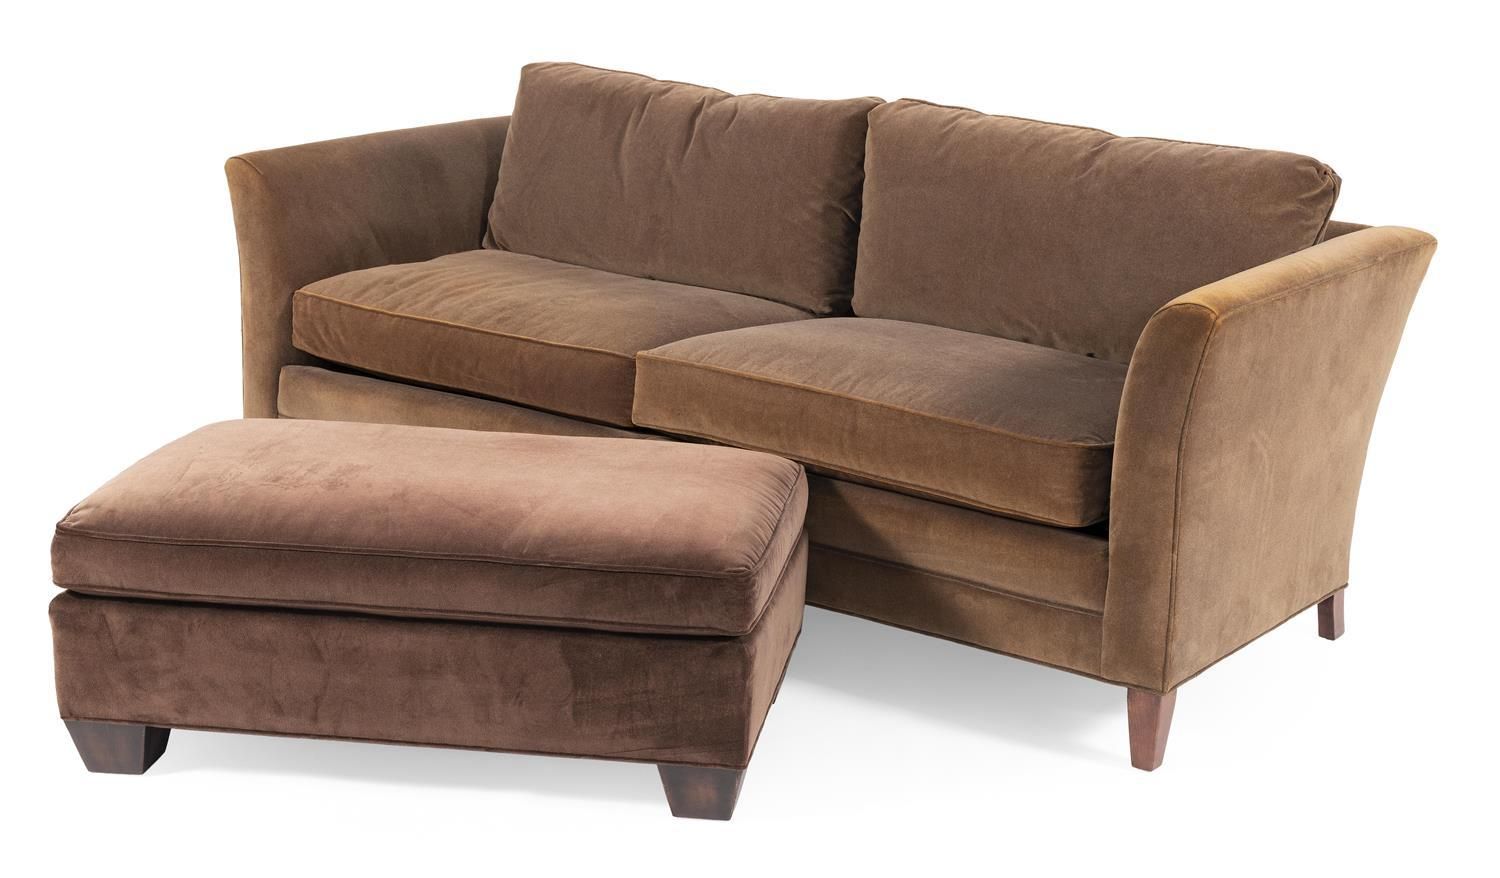 Lot – Stickley Two Cushion Sofa And Matching Ottoman Upholstered In In Sofas With Ottomans In Brown (Gallery 10 of 20)